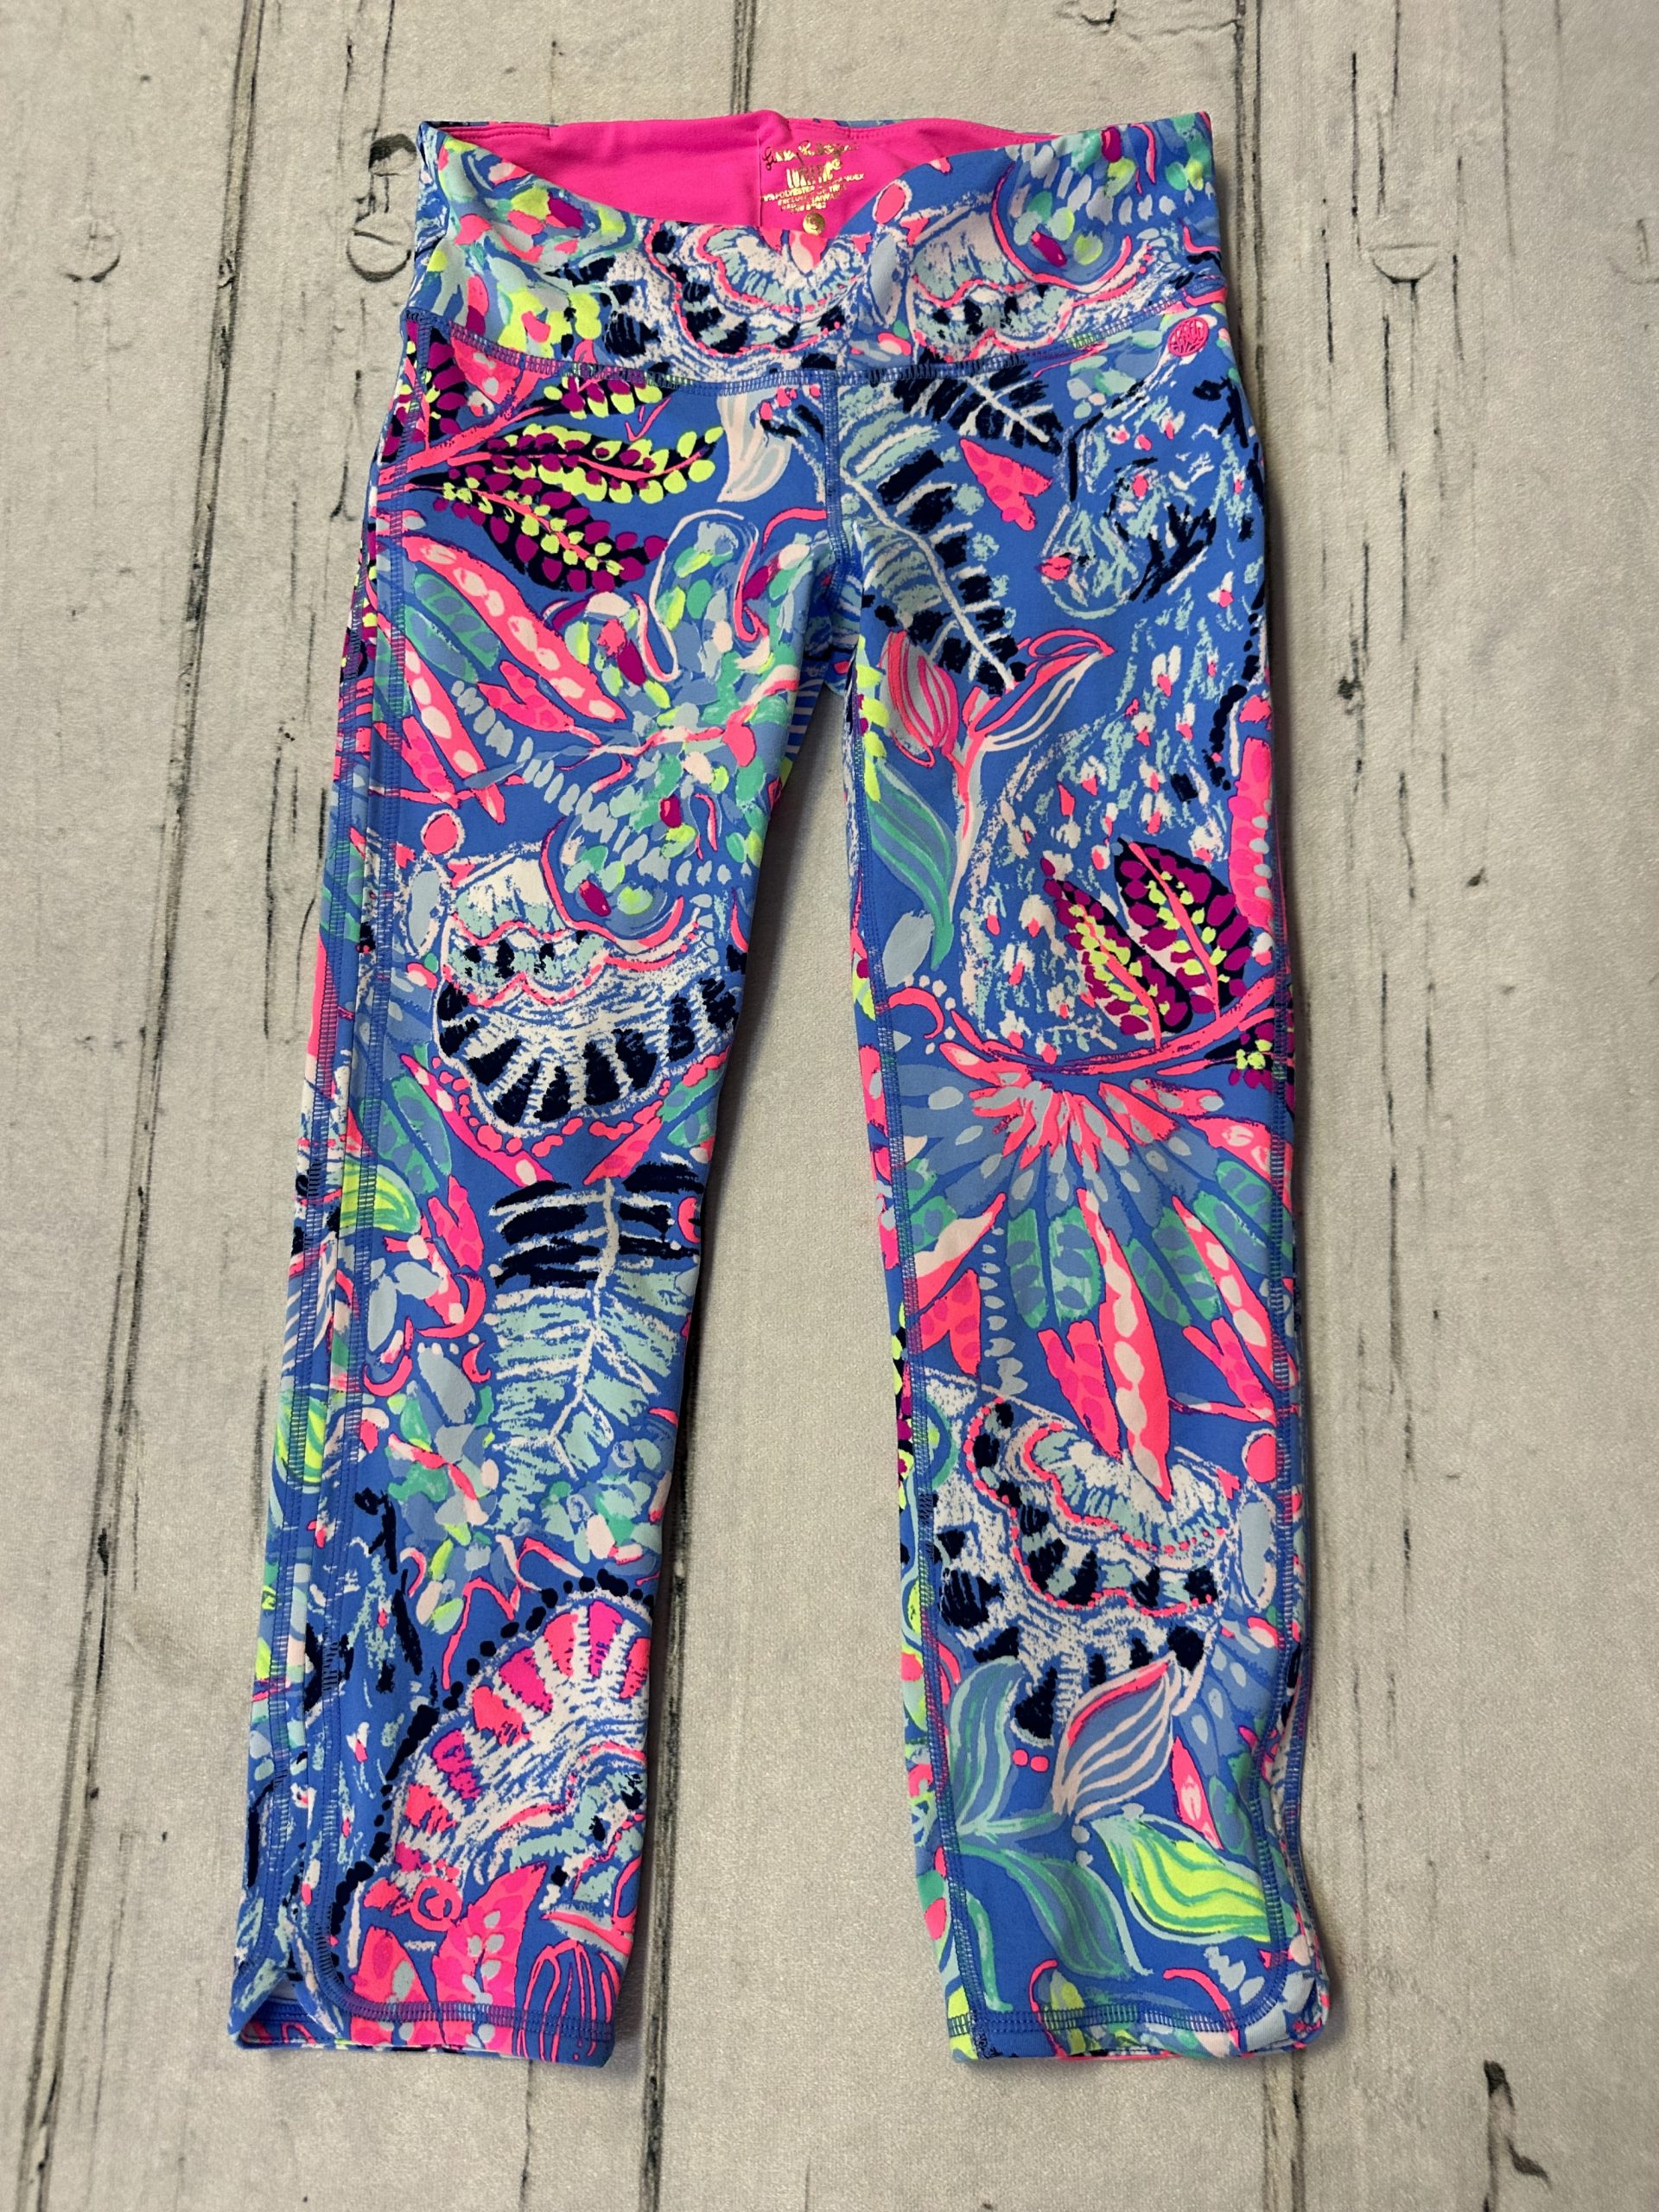 Lilly Pulitzer Maia Mermaid Grotto Girls Leggings XL 12-14 Fits Women's XS  Small